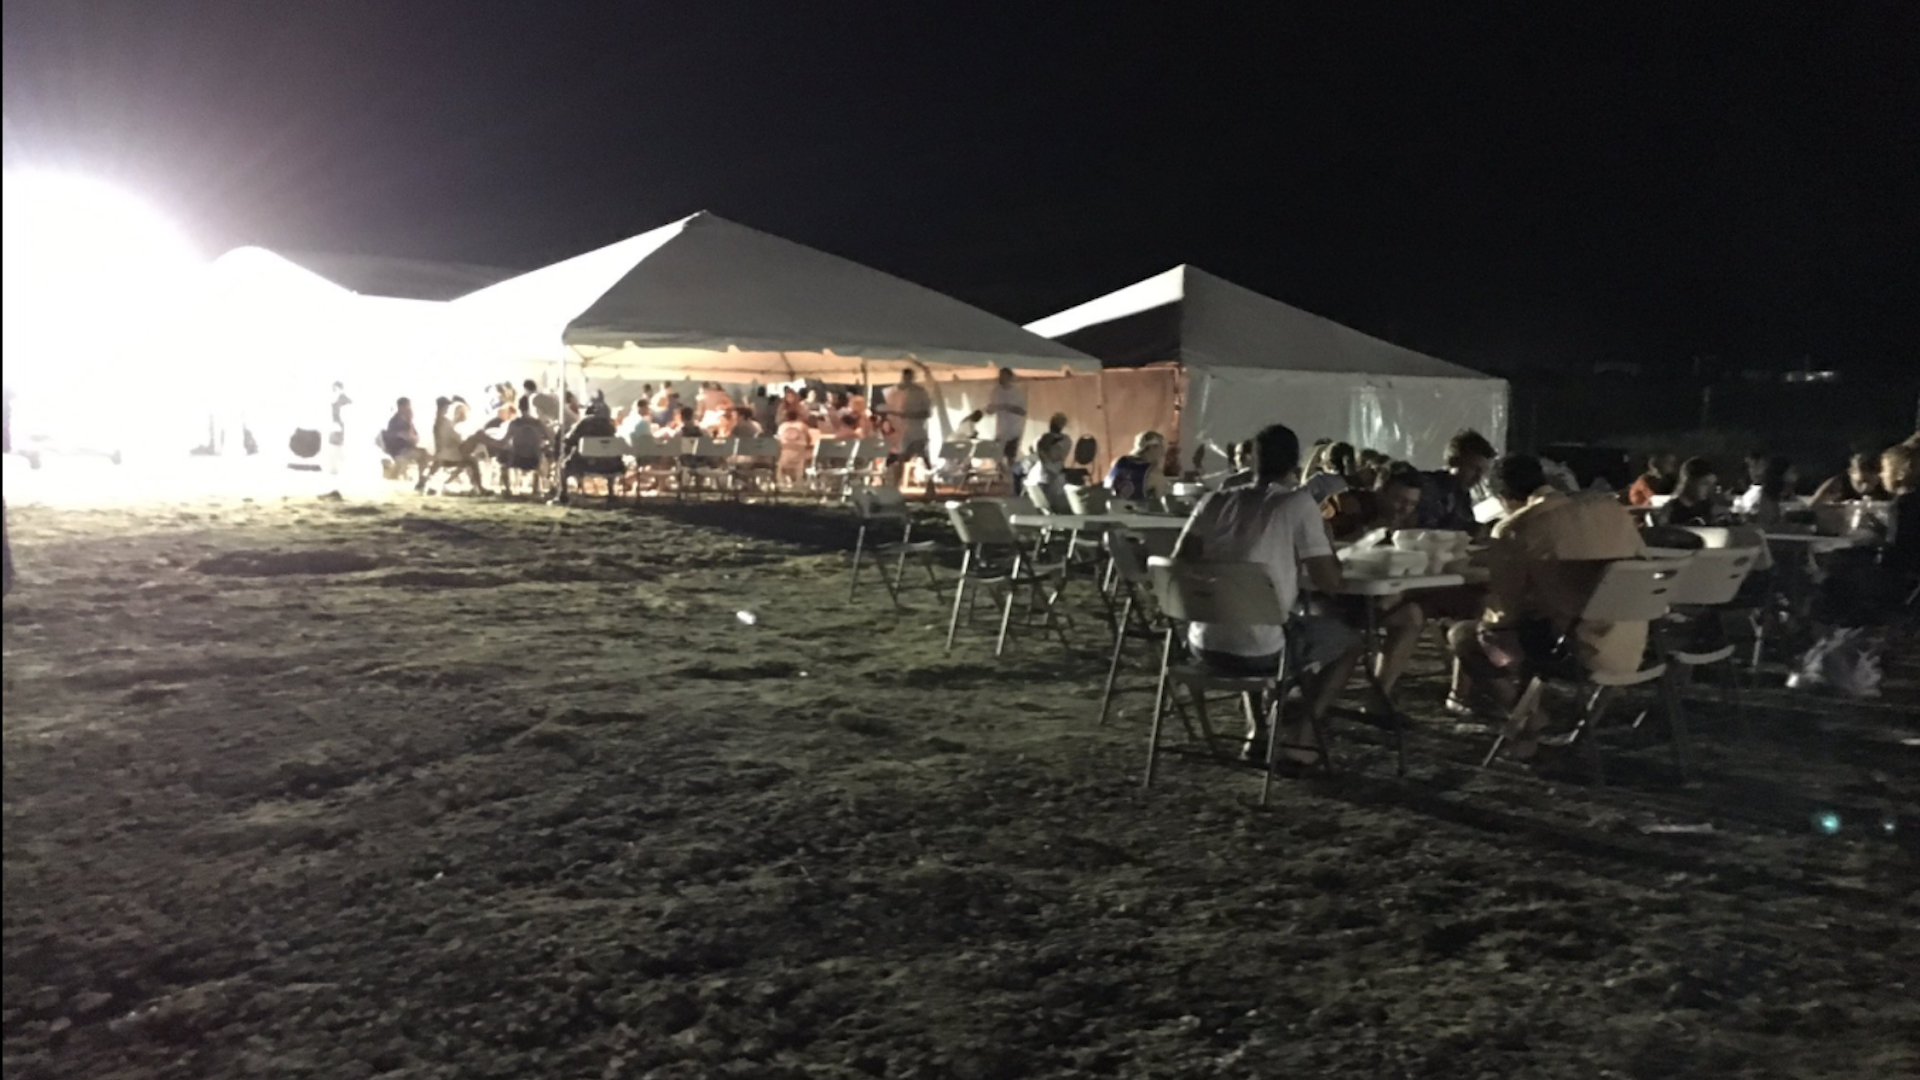 Fyre Festival was 'nothing more than a get-rich-quick scam,' $100 million  lawsuit alleges - The Washington Post